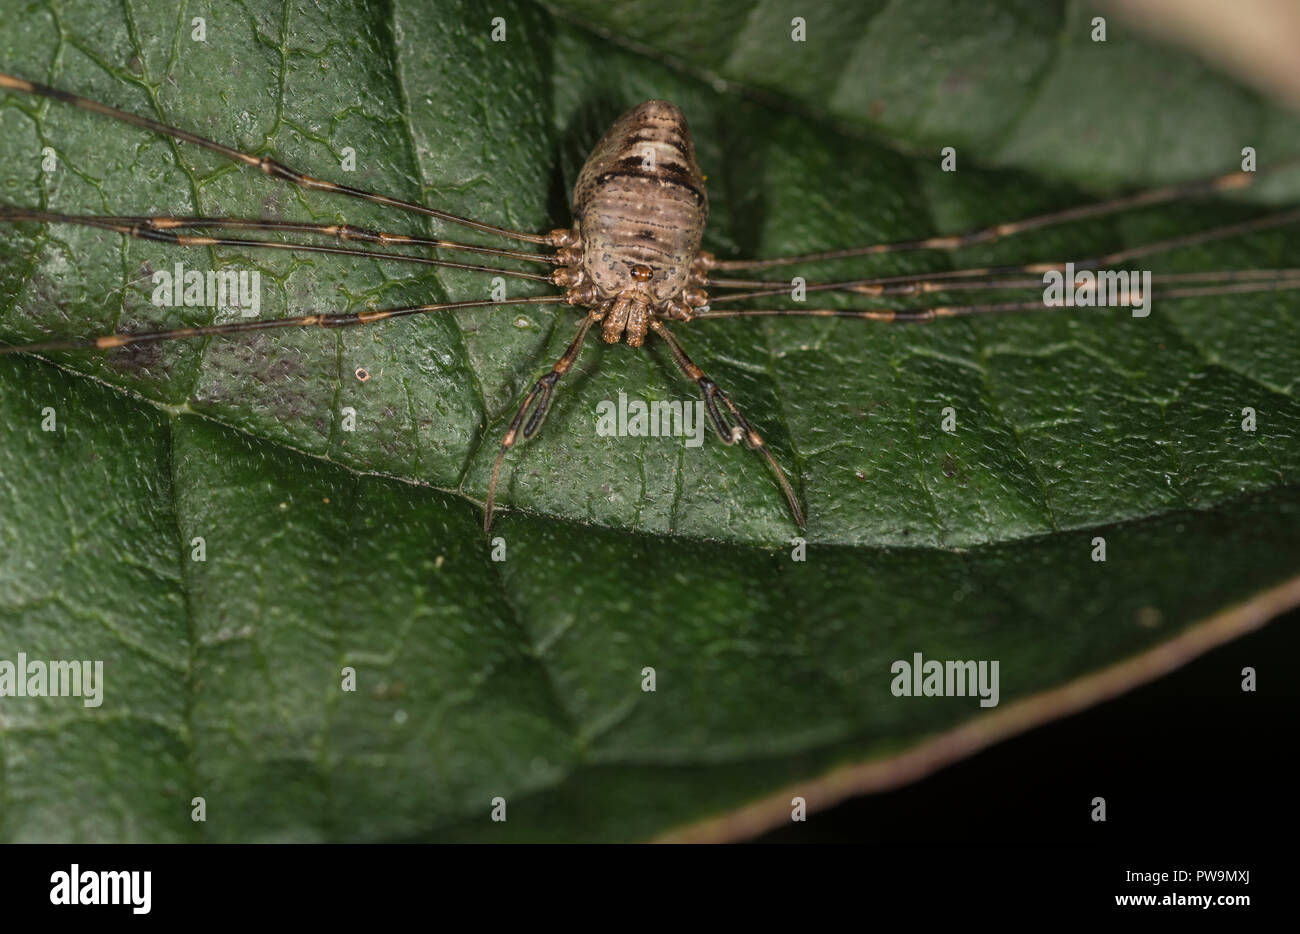 Harvestman with extended legs on a green leaf Stock Photo